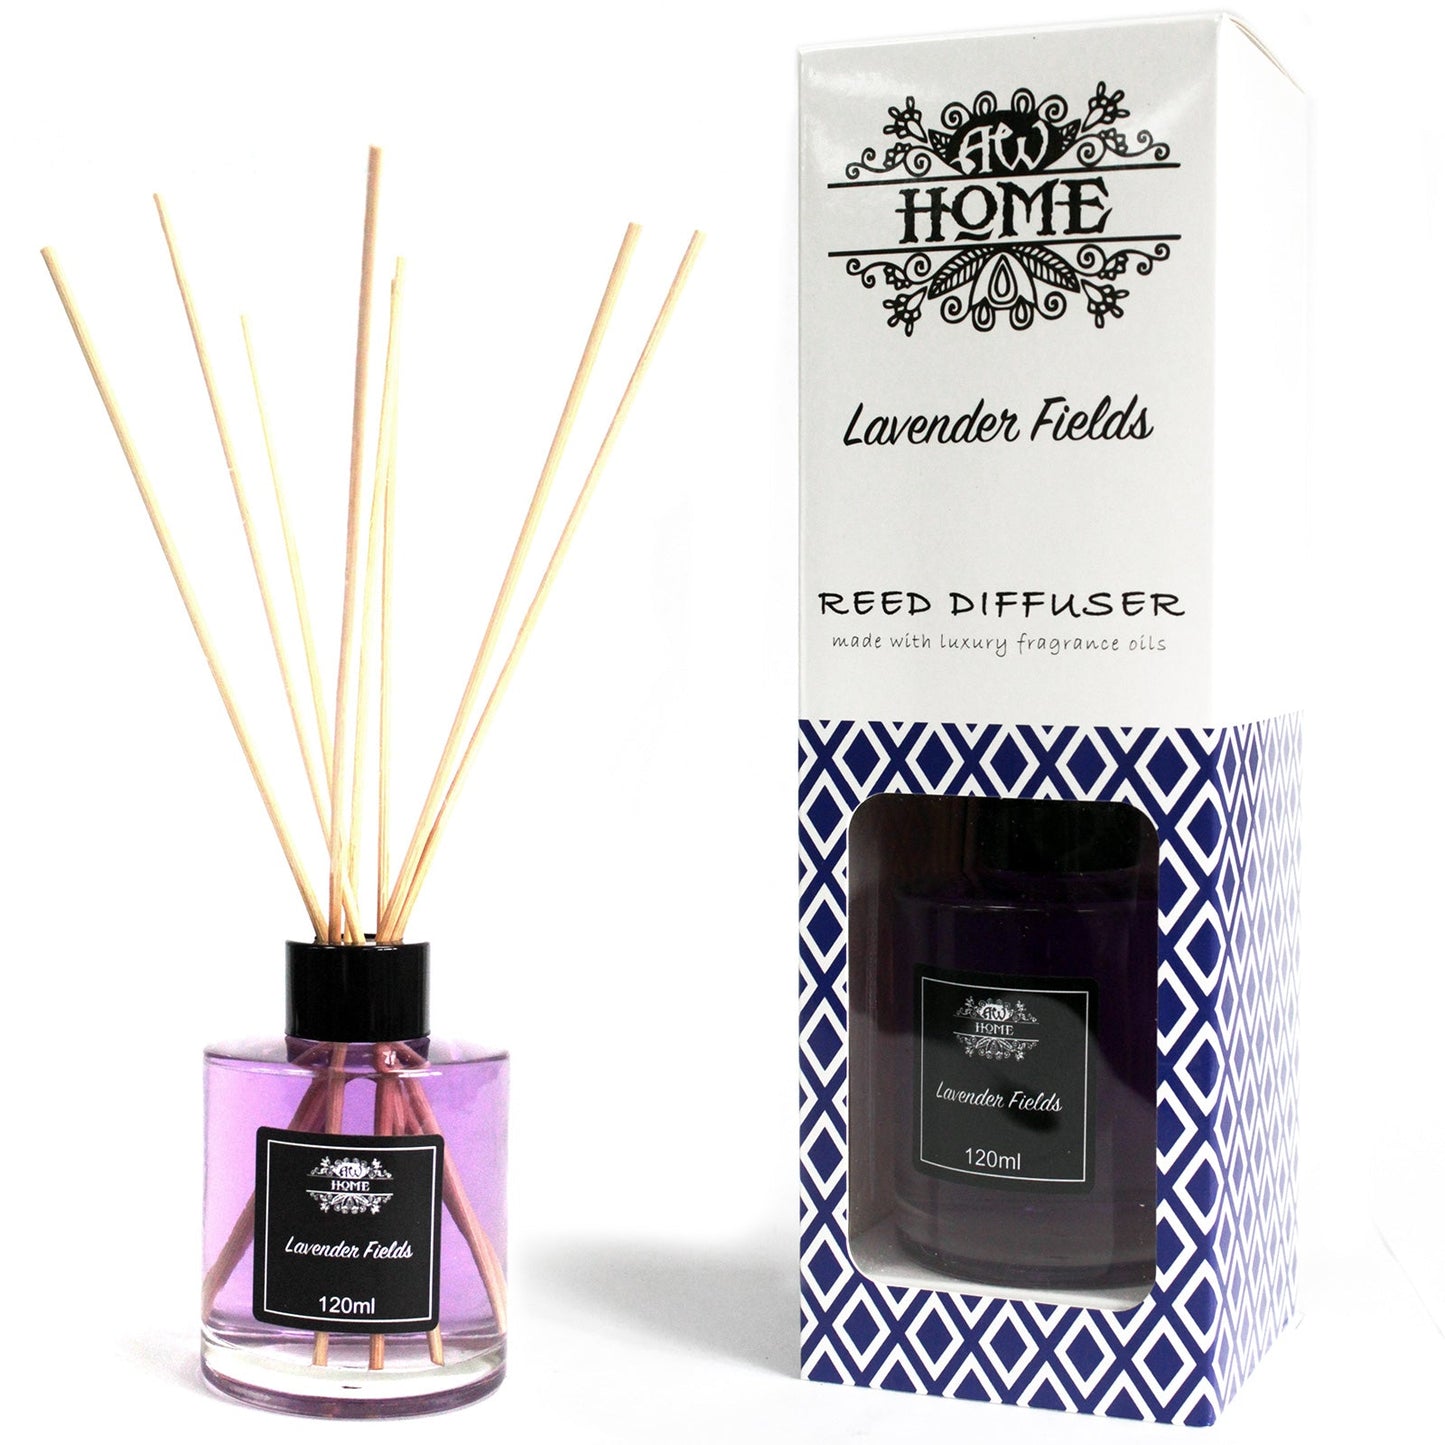 Home Fragrance Reed Diffuser - Various Fragrances - 120ml Home Fragrance Reed Diffusers - 120ml Soul Inspired Lavender Fields 